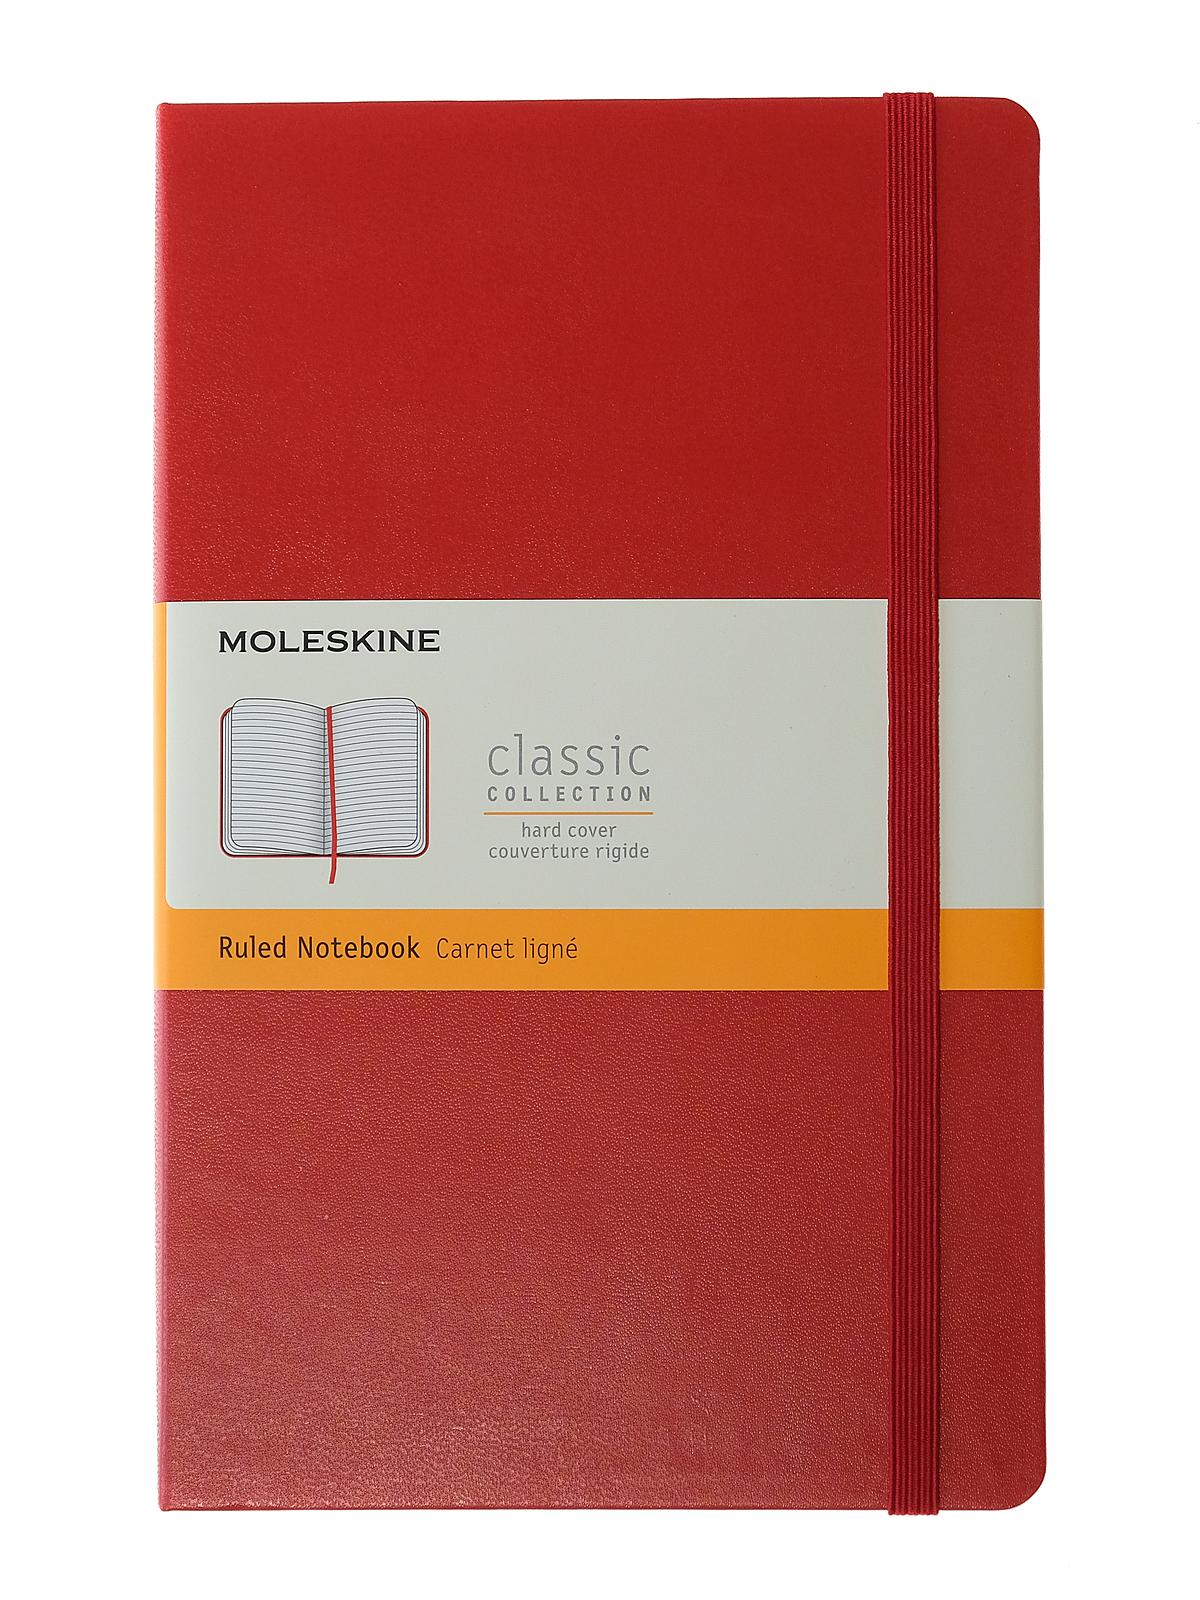 Classic Hard Cover Notebooks Red 5 In. X 8 1 4 In. 240 Pages, Lined